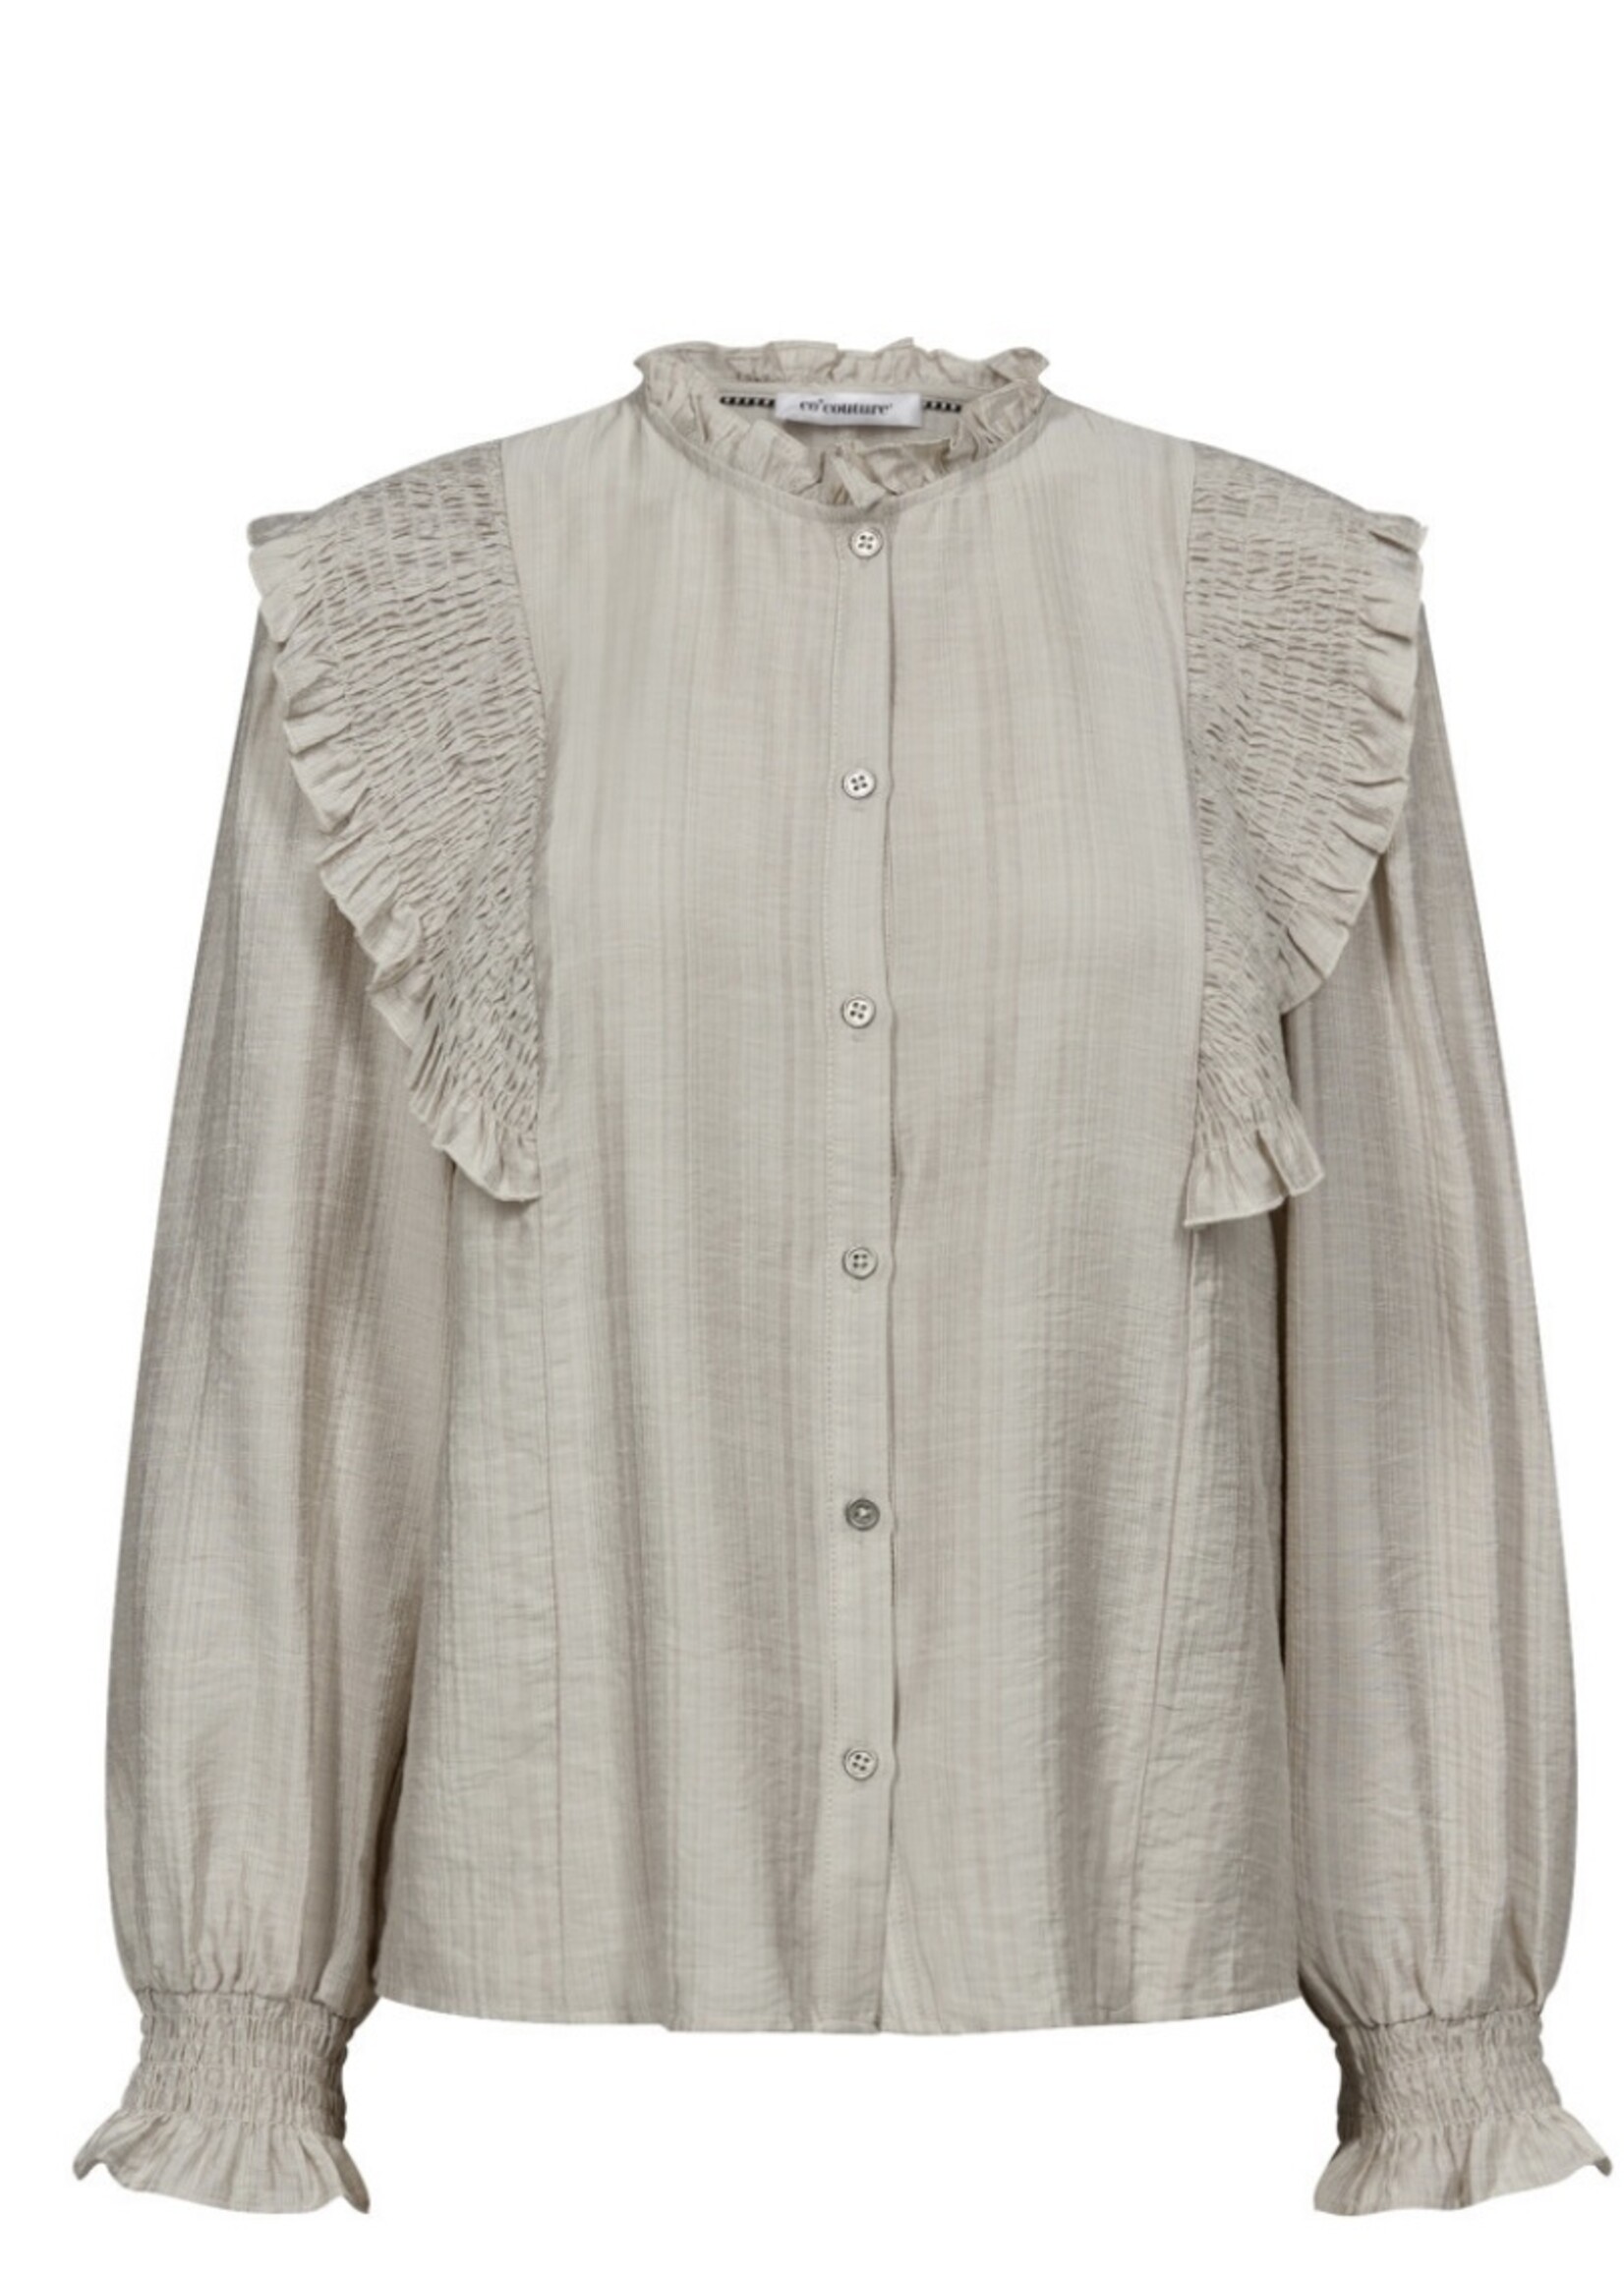 Co'Couture AngusCC Smock Frill shirt